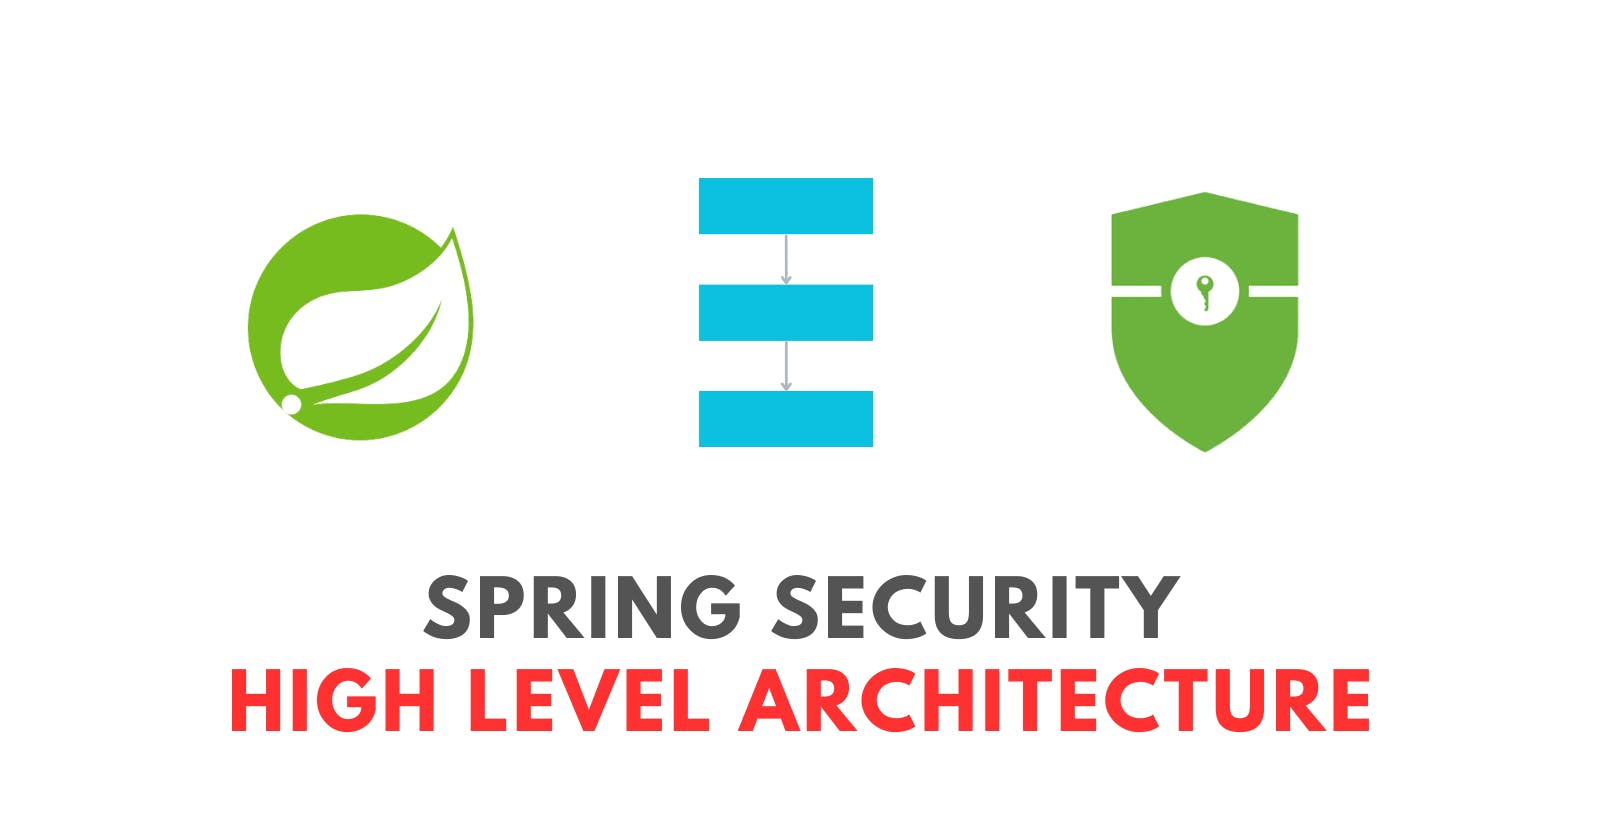 Spring Security: Understanding the High-Level Architecture is the Key